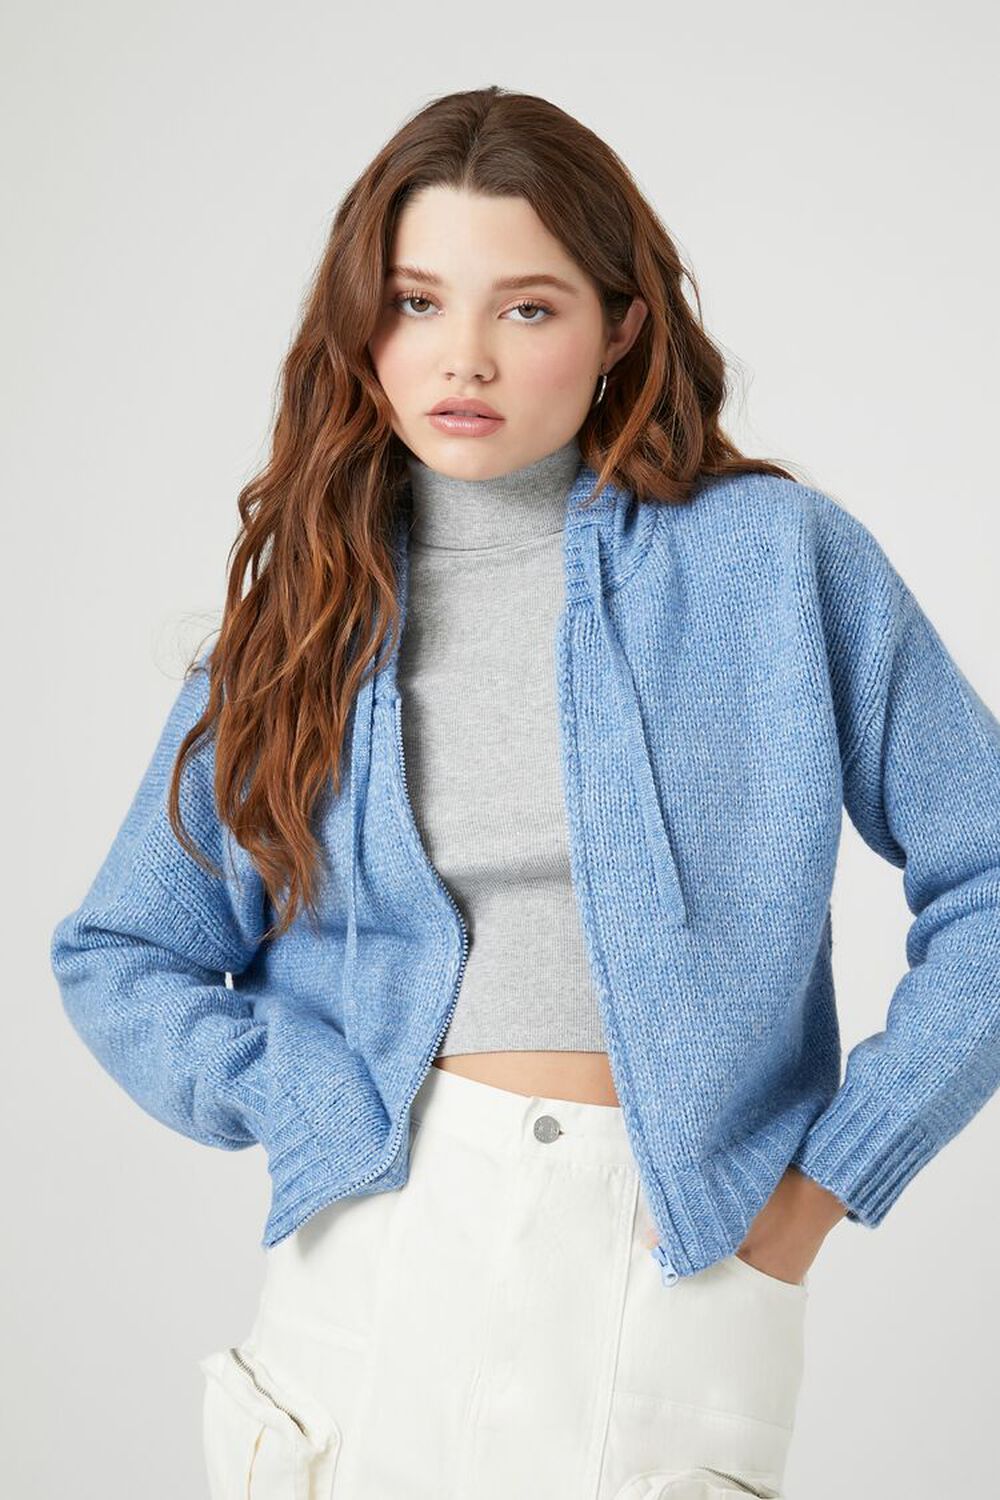 DUSTY BLUE Hooded Zip-Up Sweater, image 1